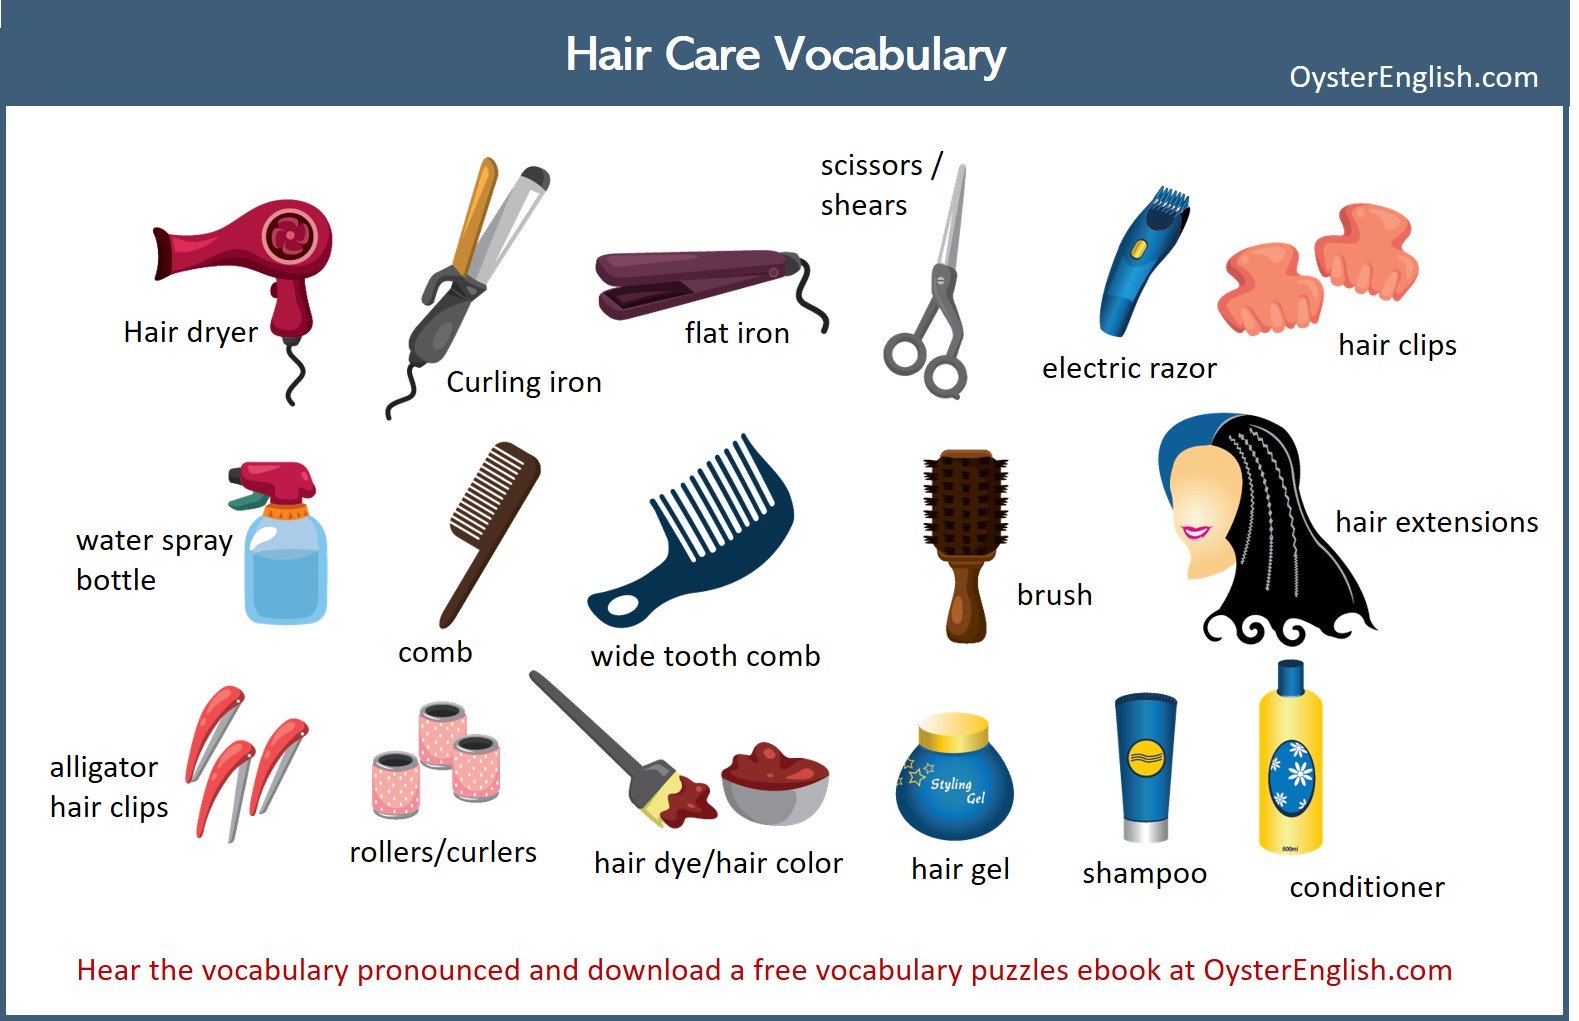 A collage of the hair care vocabulary icons and words featured on this page.